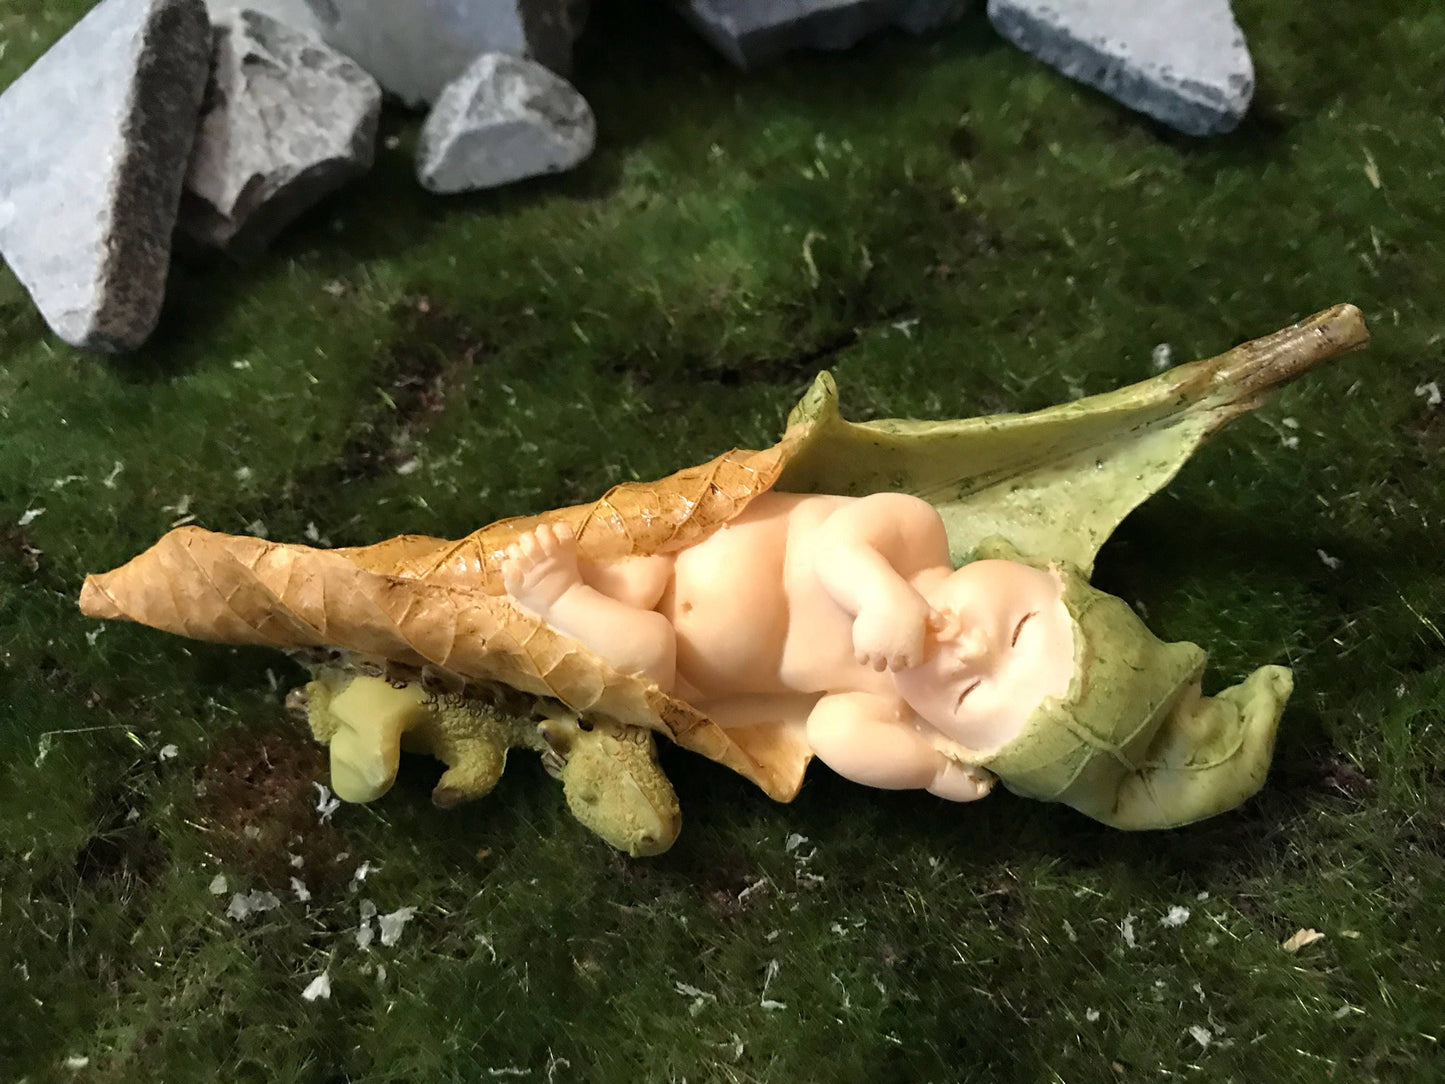 Baby Fairy laying on a leaf with a baby dragon curled up next to her.